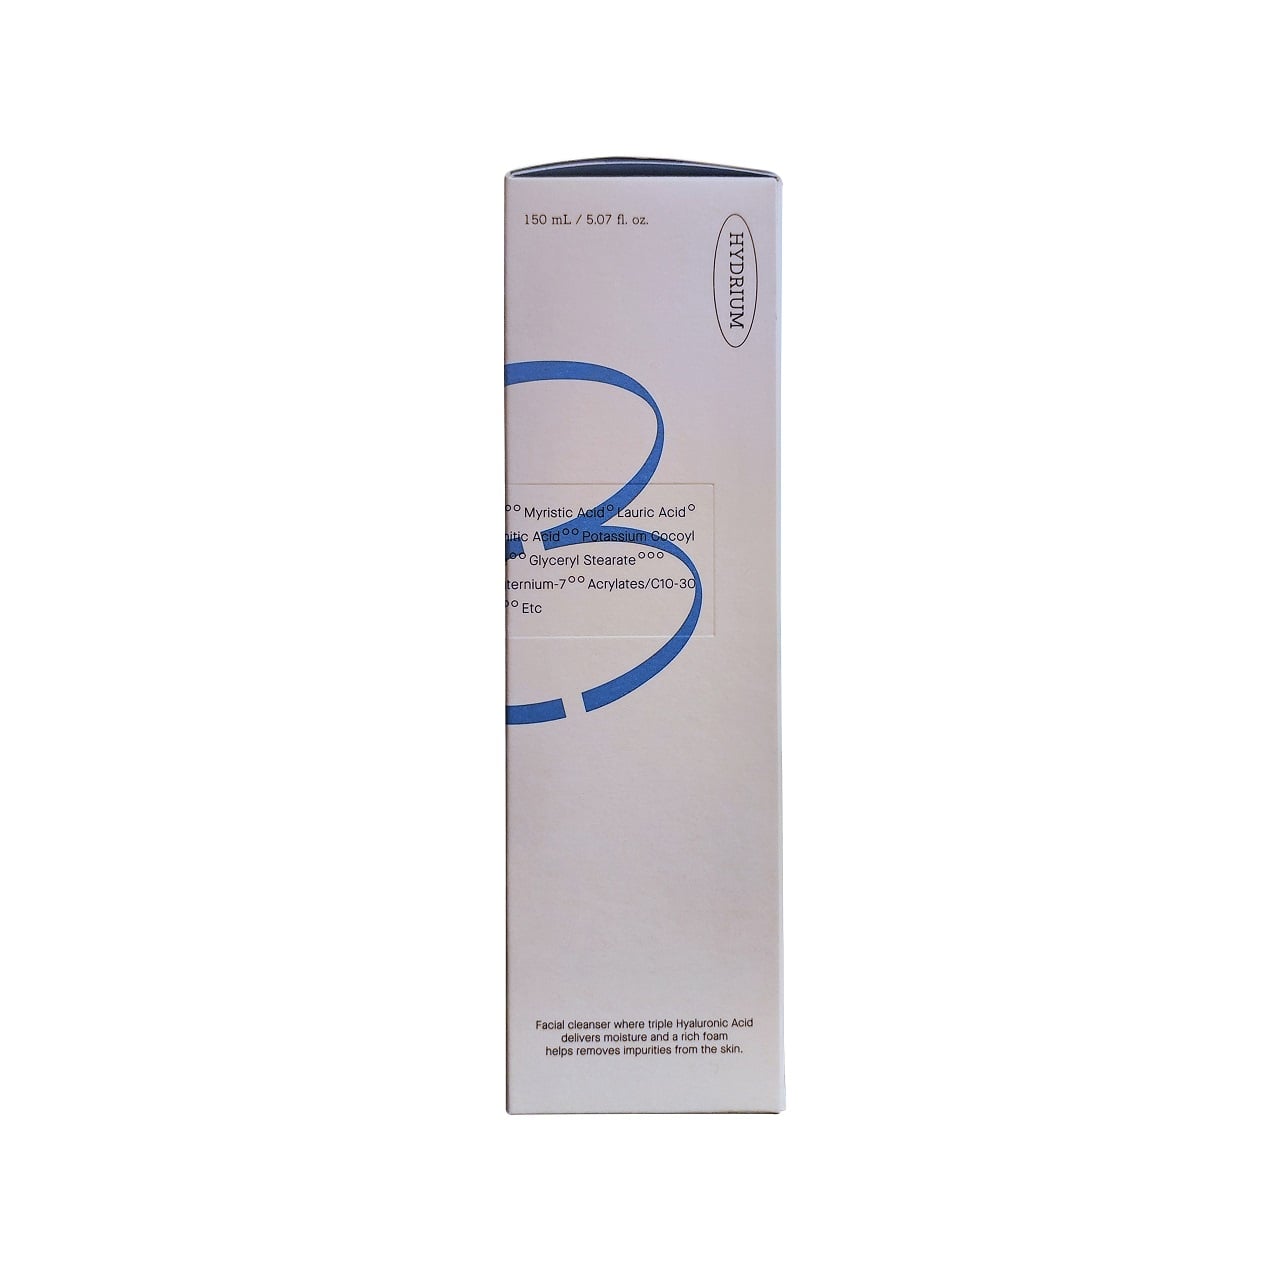 Product label for COSRX Triple Hyaluronic Moisturizing Cleanser (150 mL)